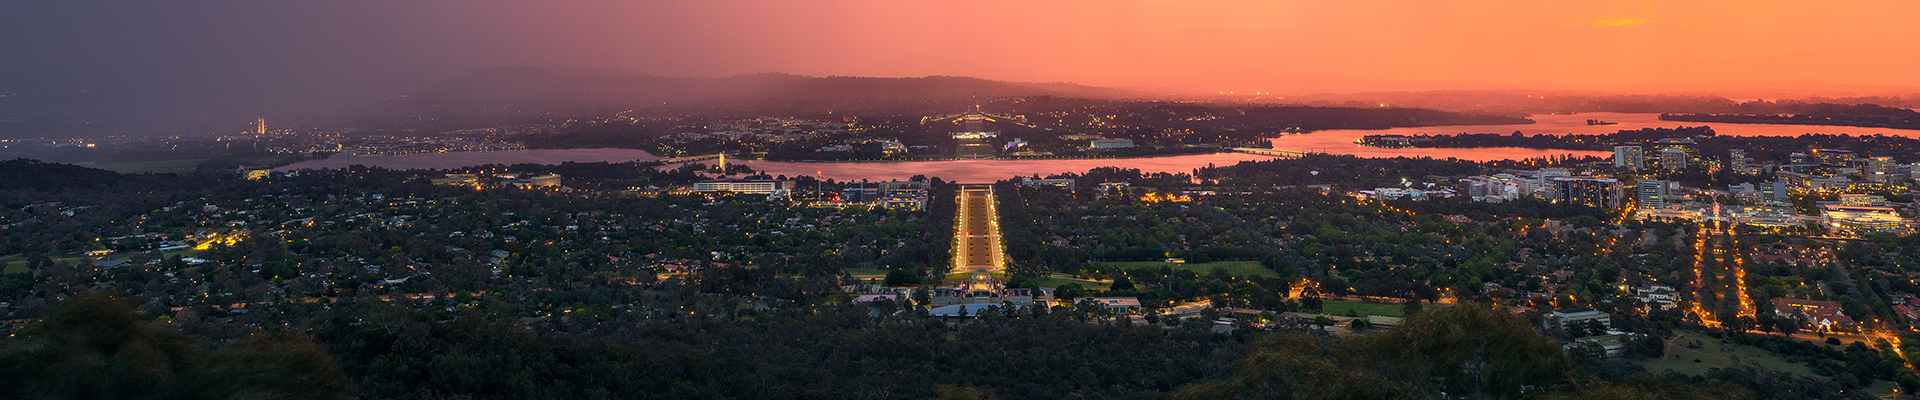 View from Mount Ainslie at sunset, Canberra, ACT